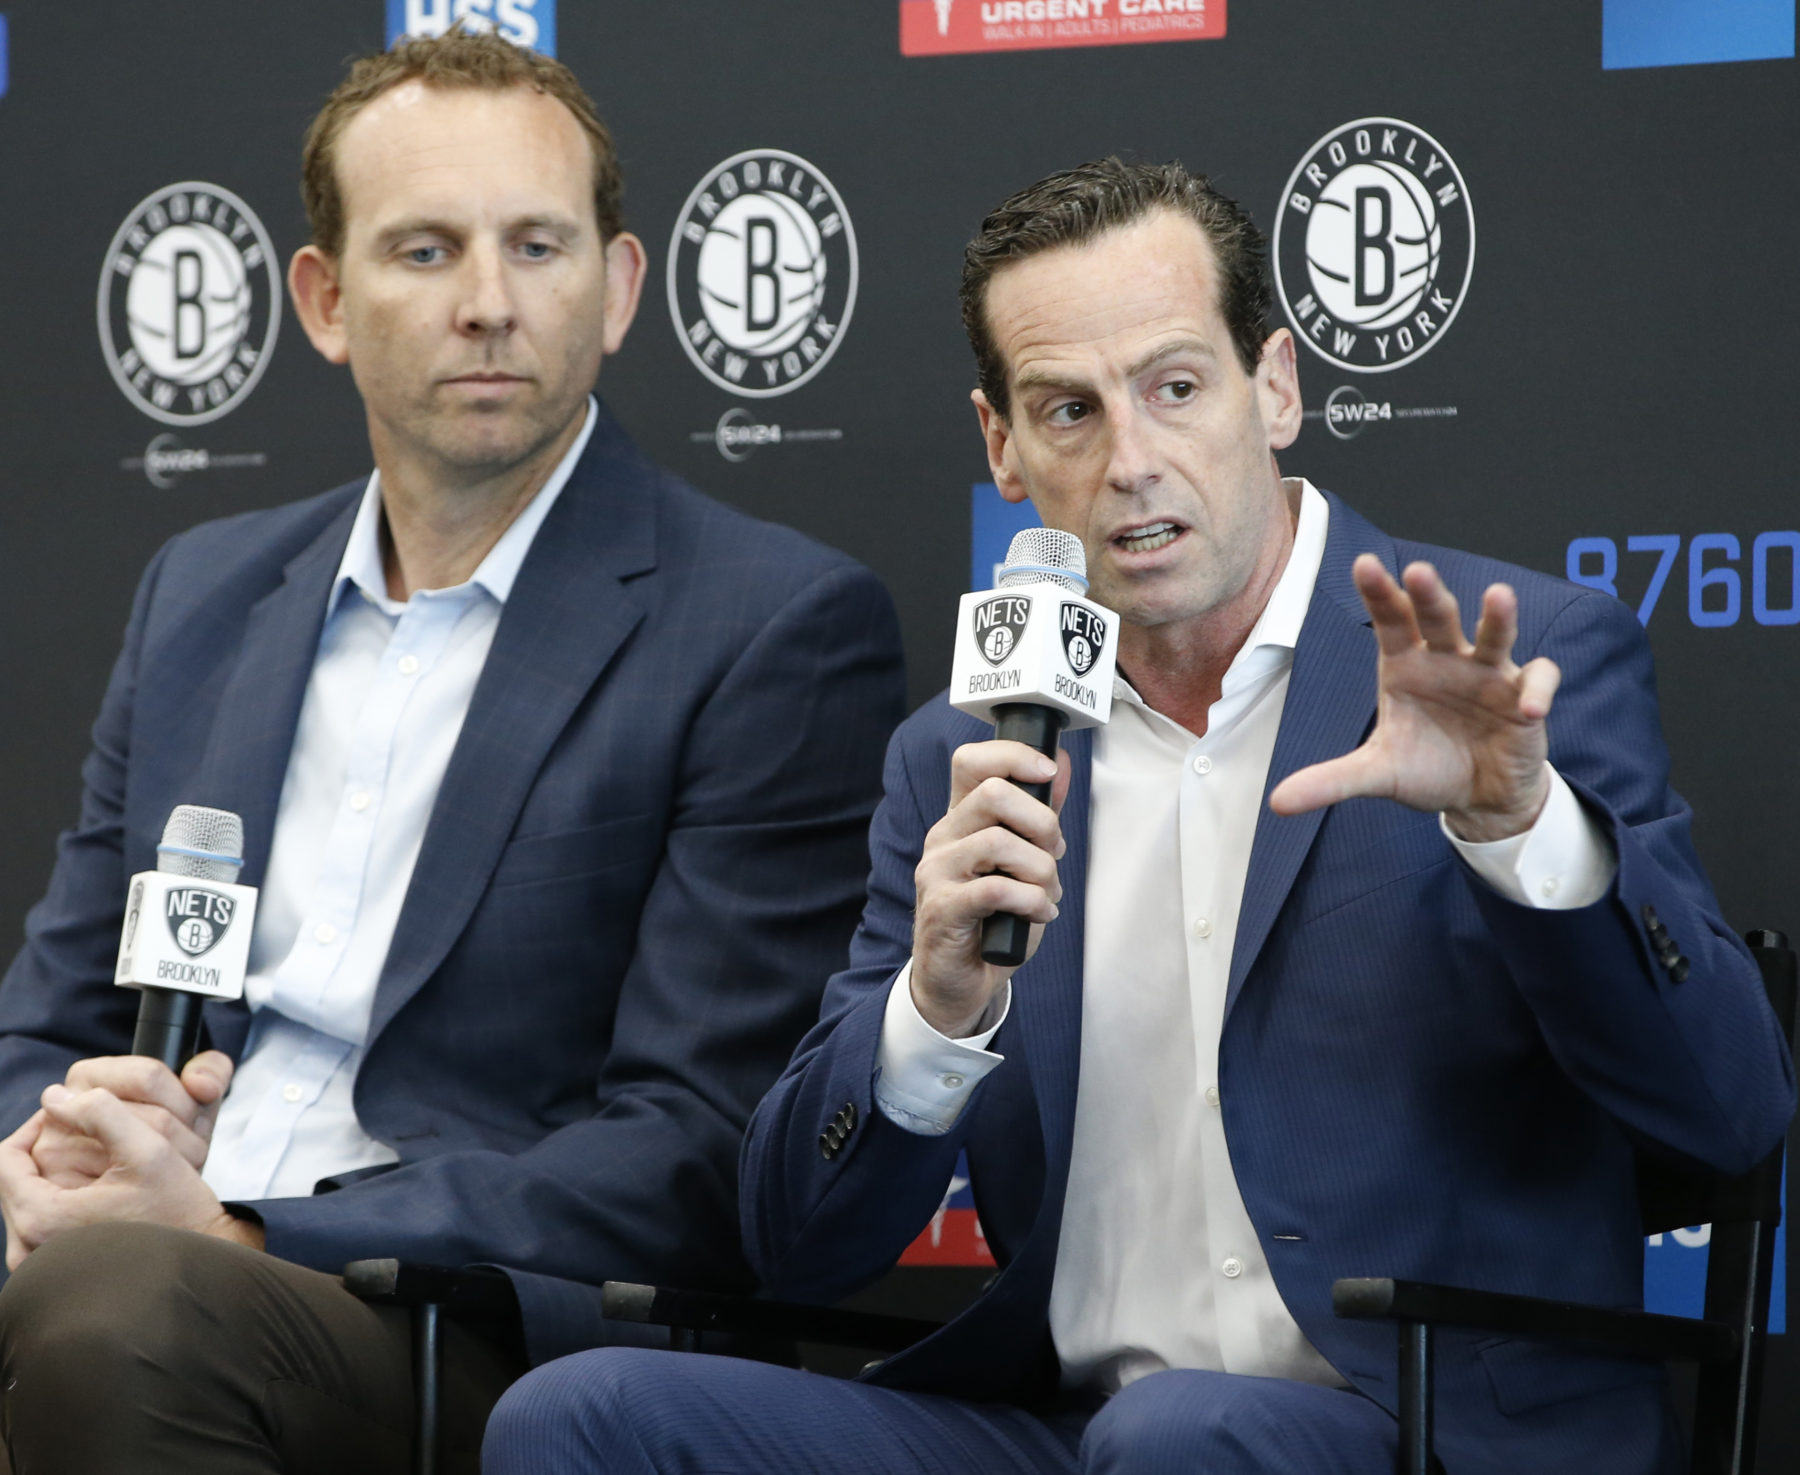 Nets GM Sean Marks and head coach Kenny Atkinson went back to their former organizations in search of front-office help, hiring assistant GMs Jeff Peterson from Atlanta and Andy Birdsong from San Antonio during the Memorial Day weekend. AP Photo by Kathy Willens